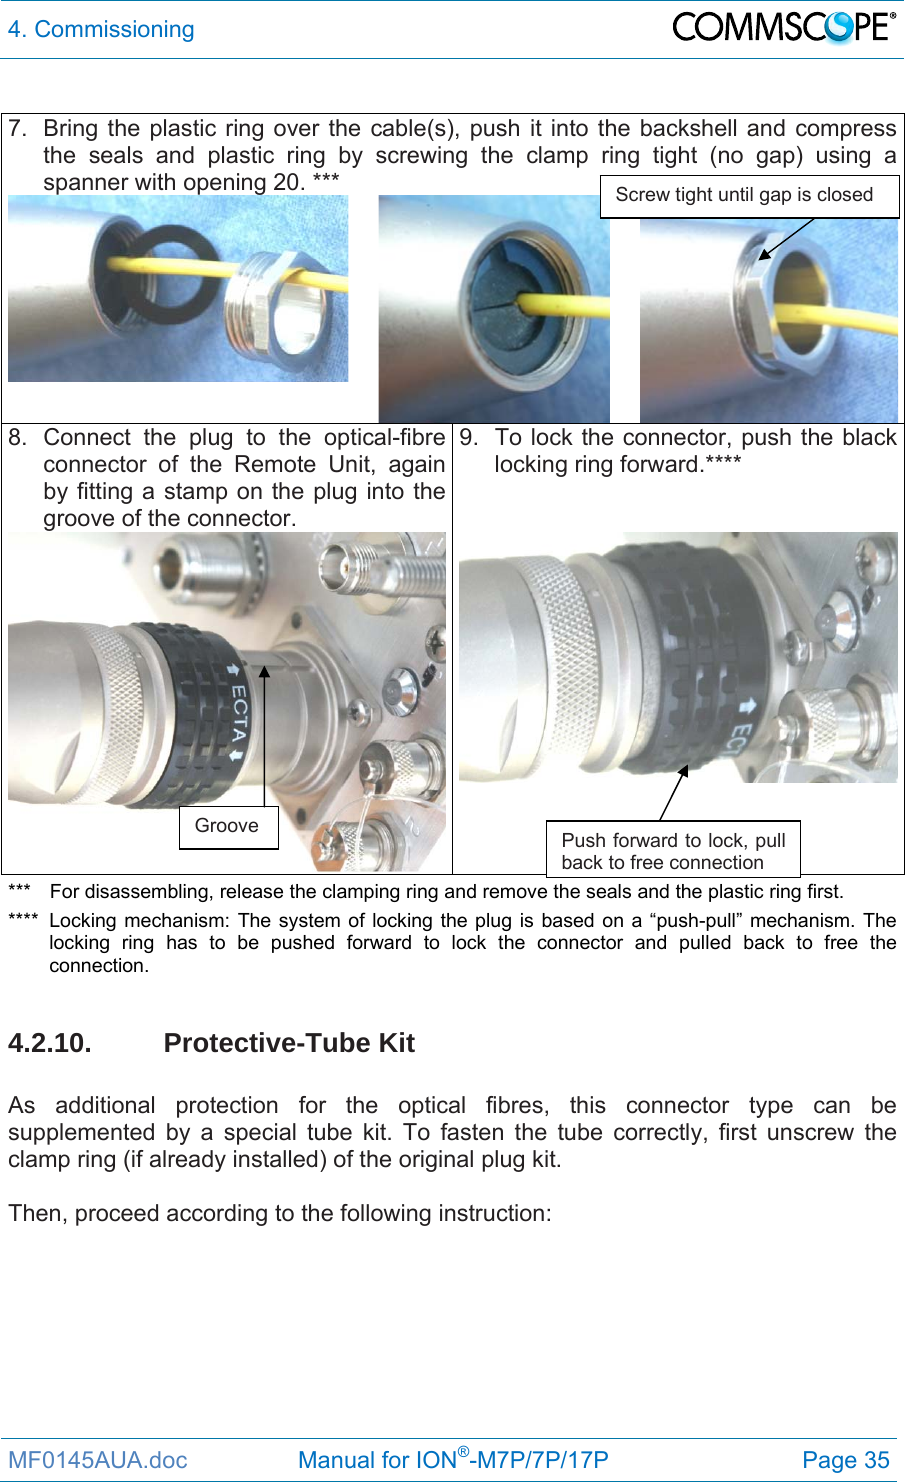 4. Commissioning  MF0145AUA.doc                 Manual for ION®-M7P/7P/17P Page 35  7.  Bring the plastic ring over the cable(s), push it into the backshell and compress the seals and plastic ring by screwing the clamp ring tight (no gap) using a spanner with opening 20. *** 8. Connect the plug to the optical-fibre connector of the Remote Unit, again by fitting a stamp on the plug into the groove of the connector.  9.  To lock the connector, push the black locking ring forward.****  ***  For disassembling, release the clamping ring and remove the seals and the plastic ring first. ****  Locking mechanism: The system of locking the plug is based on a “push-pull” mechanism. The locking ring has to be pushed forward to lock the connector and pulled back to free the connection.  4.2.10. Protective-Tube Kit  As additional protection for the optical fibres, this connector type can be supplemented by a special tube kit. To fasten the tube correctly, first unscrew the clamp ring (if already installed) of the original plug kit.   Then, proceed according to the following instruction:   Groove  Push forward to lock, pull back to free connection Screw tight until gap is closed 